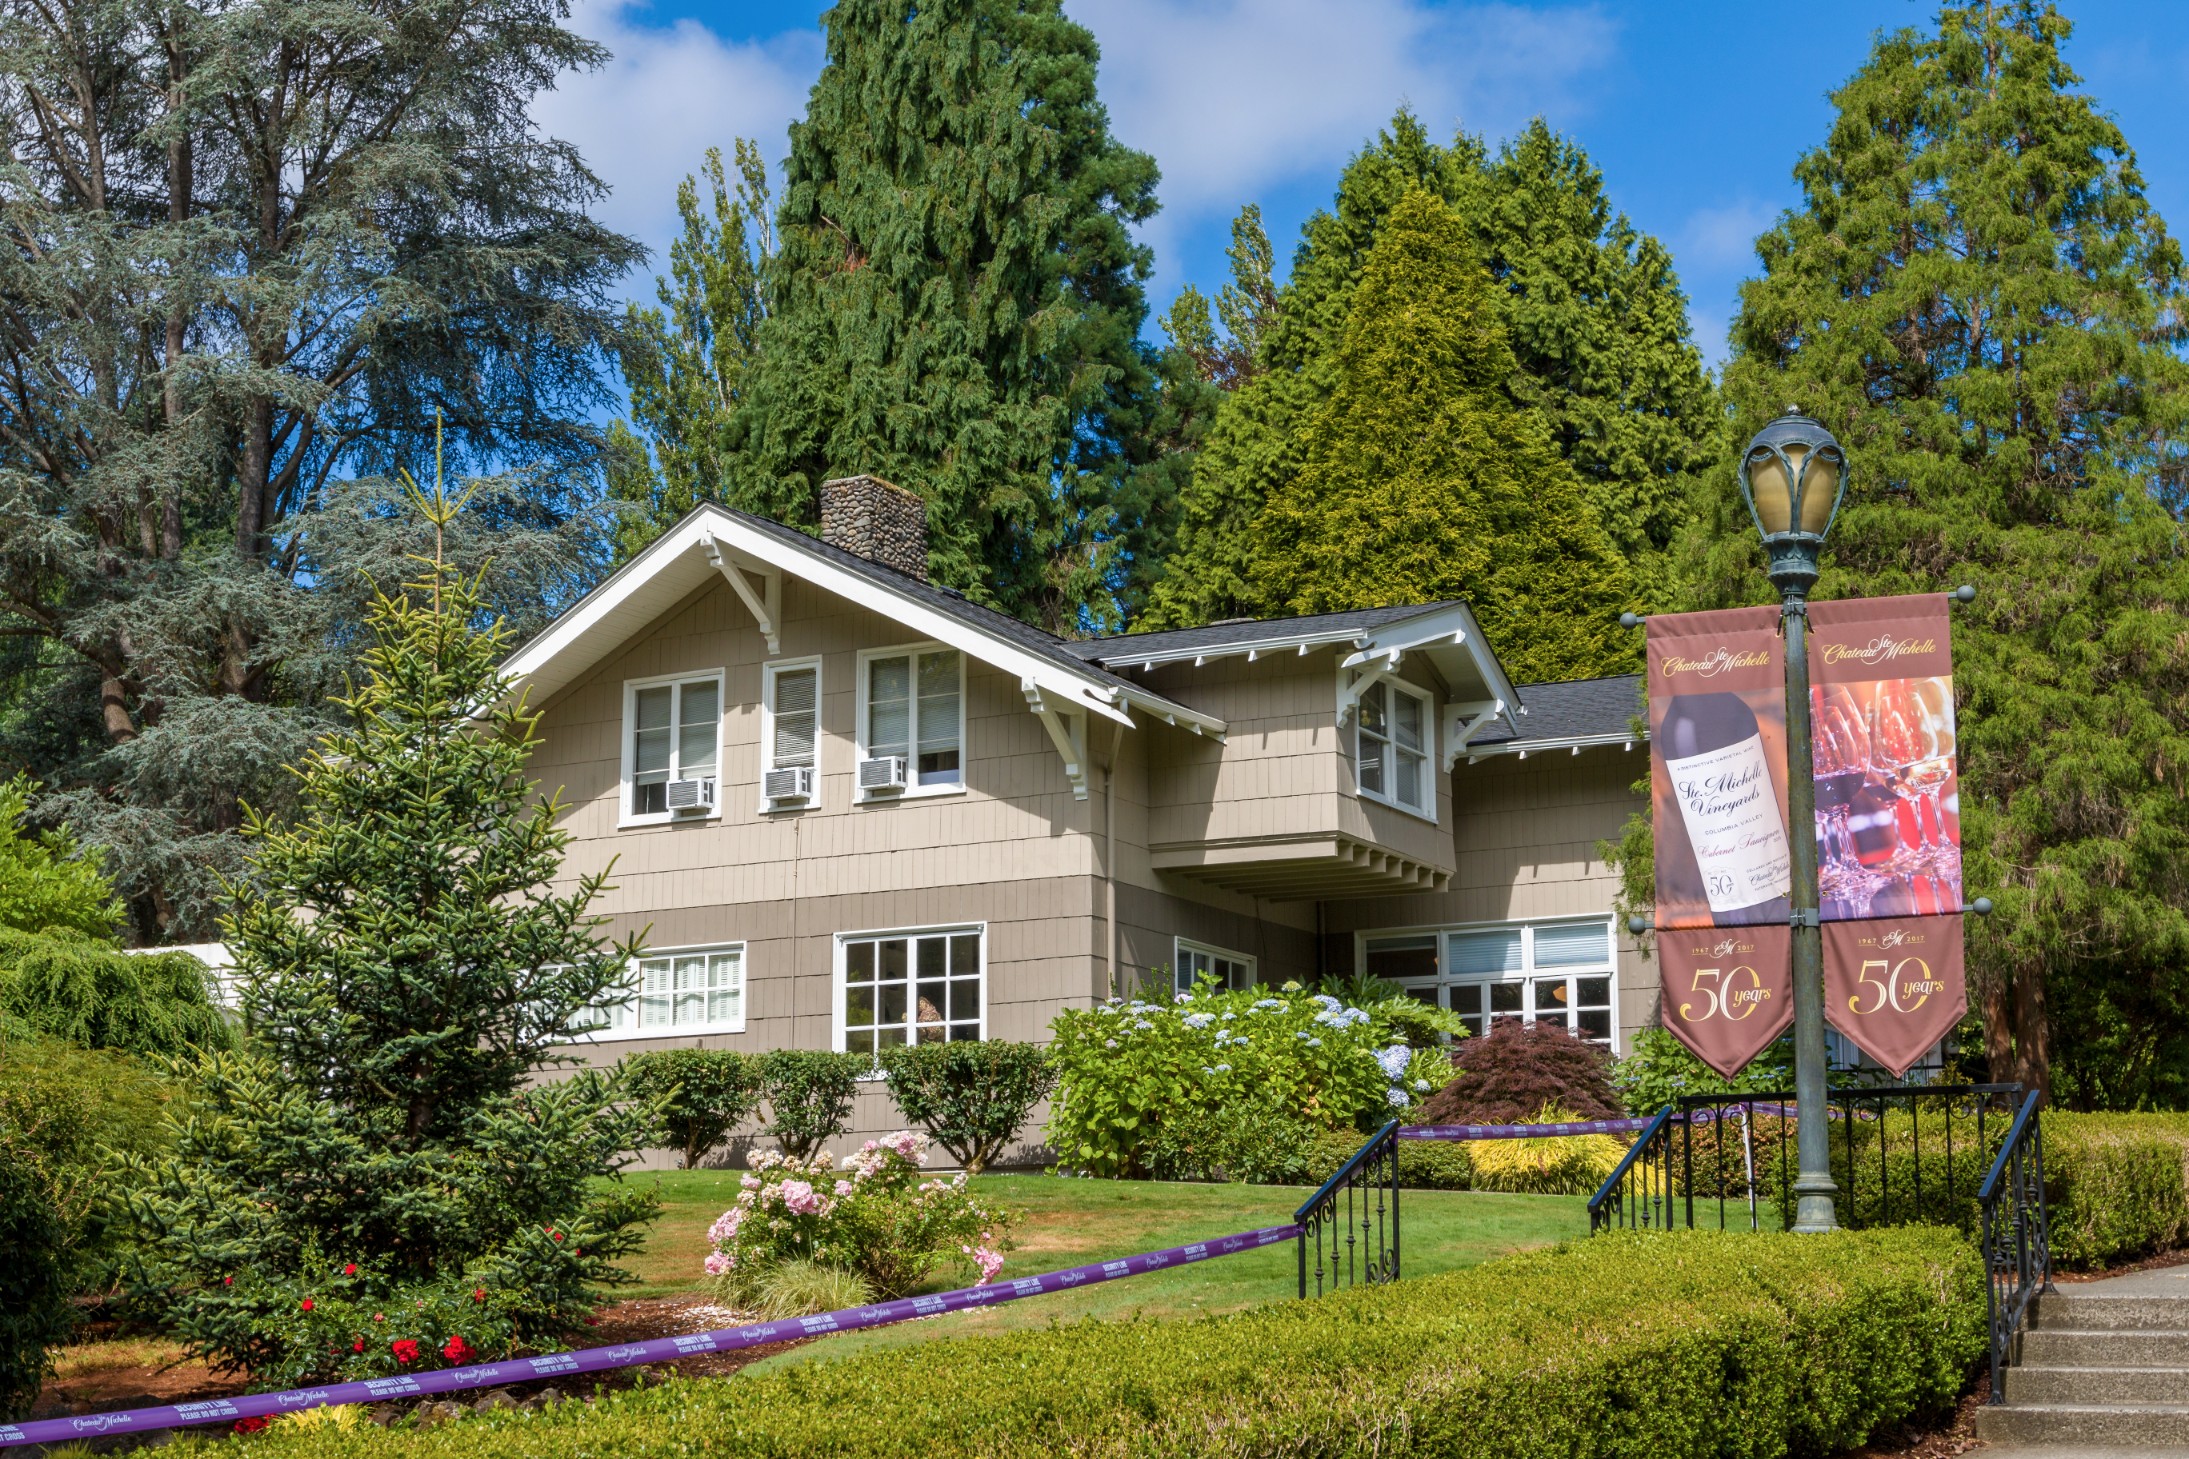 Woodinville real estate